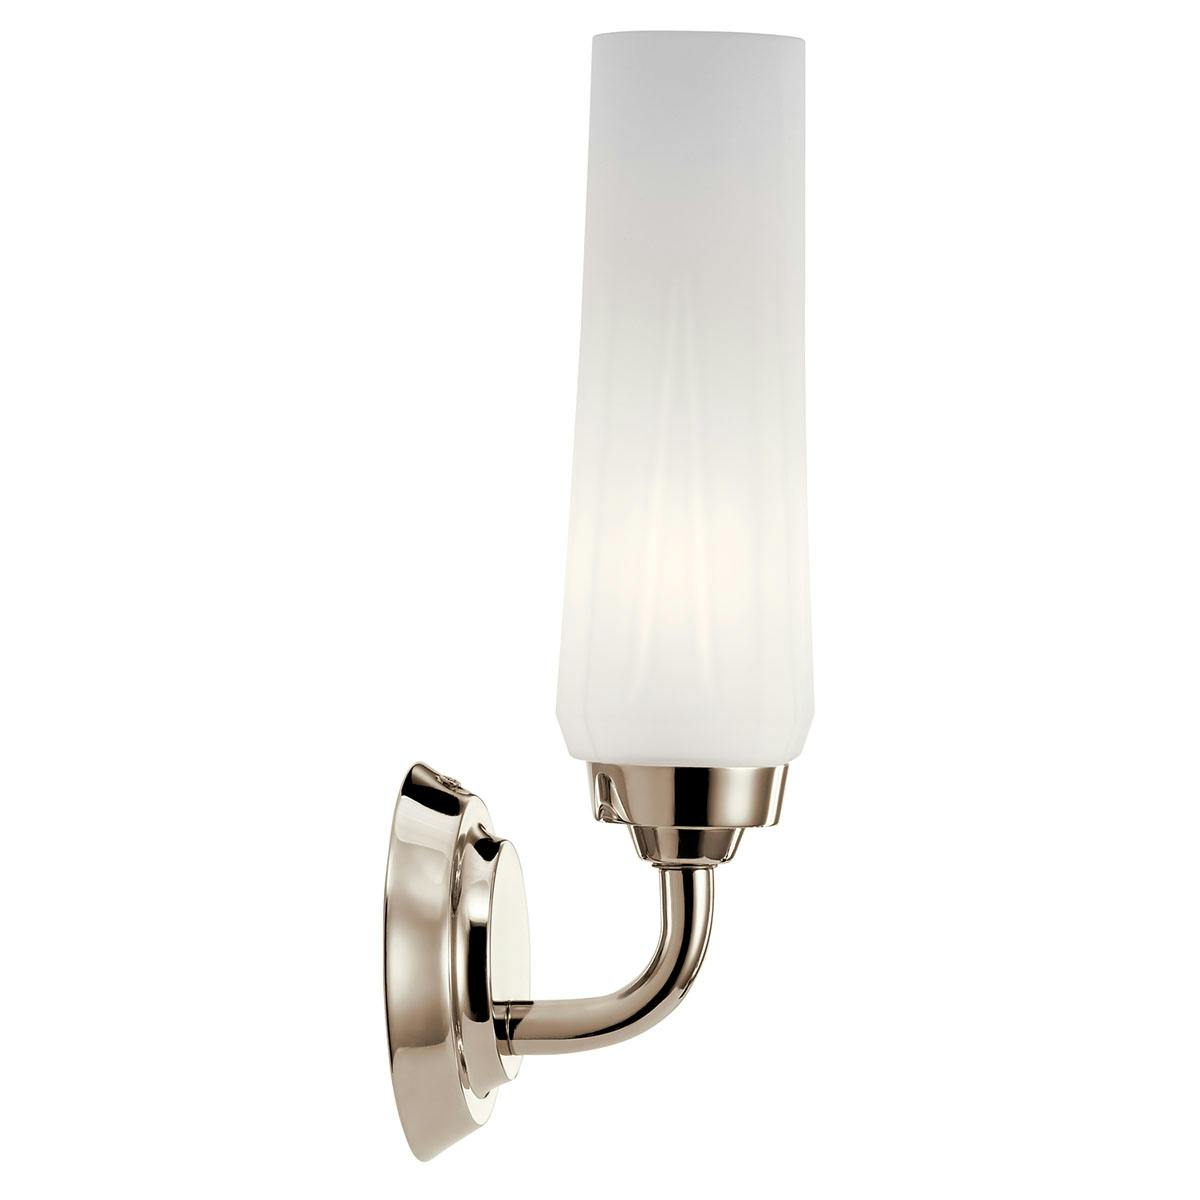 Profile view of the Truby 1 Light Wall Sconce Polished Nickel on a white background